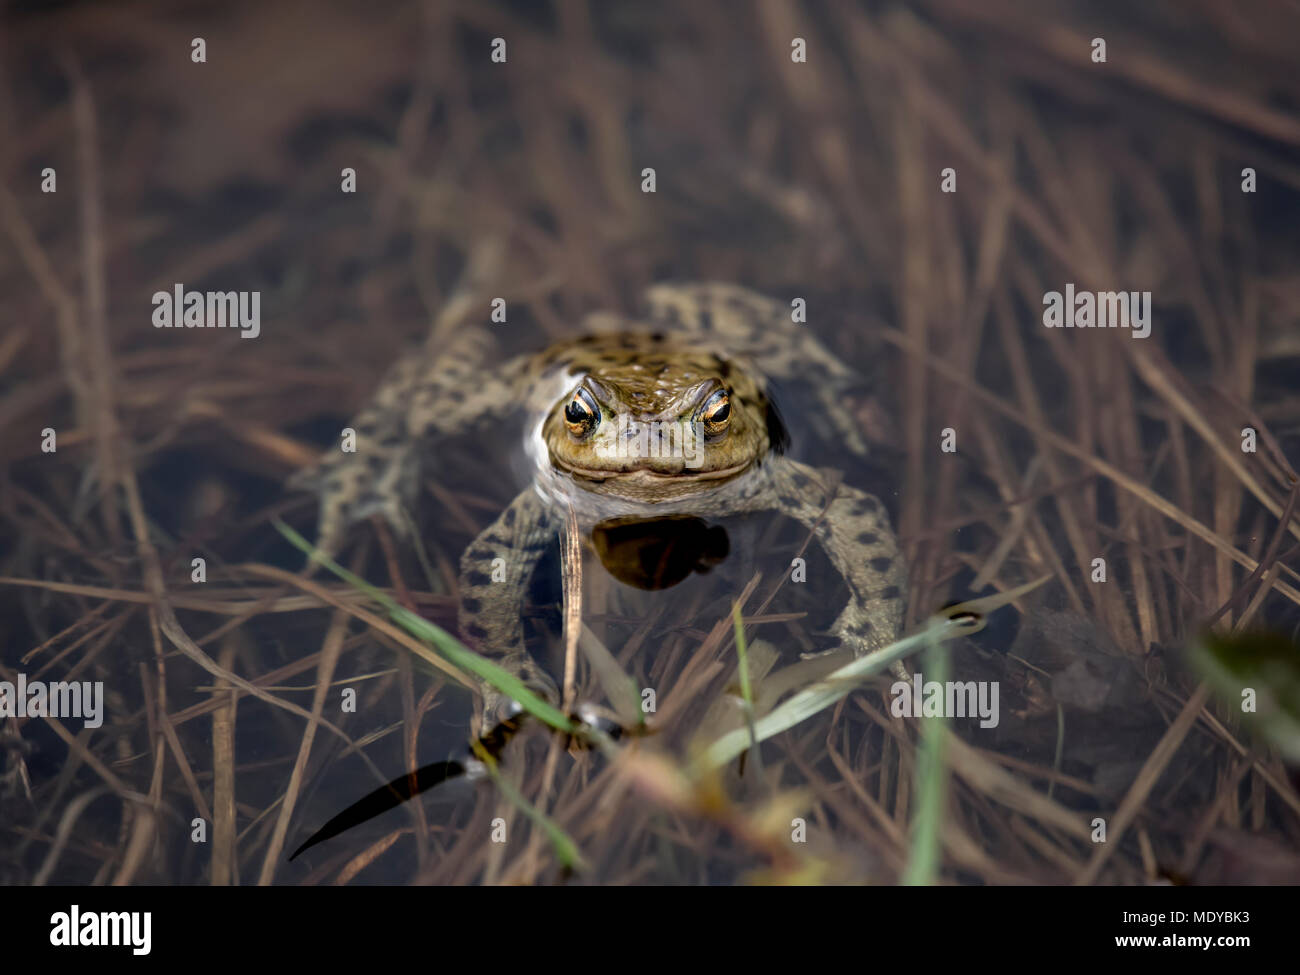 Frog poking its head out of the water Stock Photo: 180696071 - Alamy